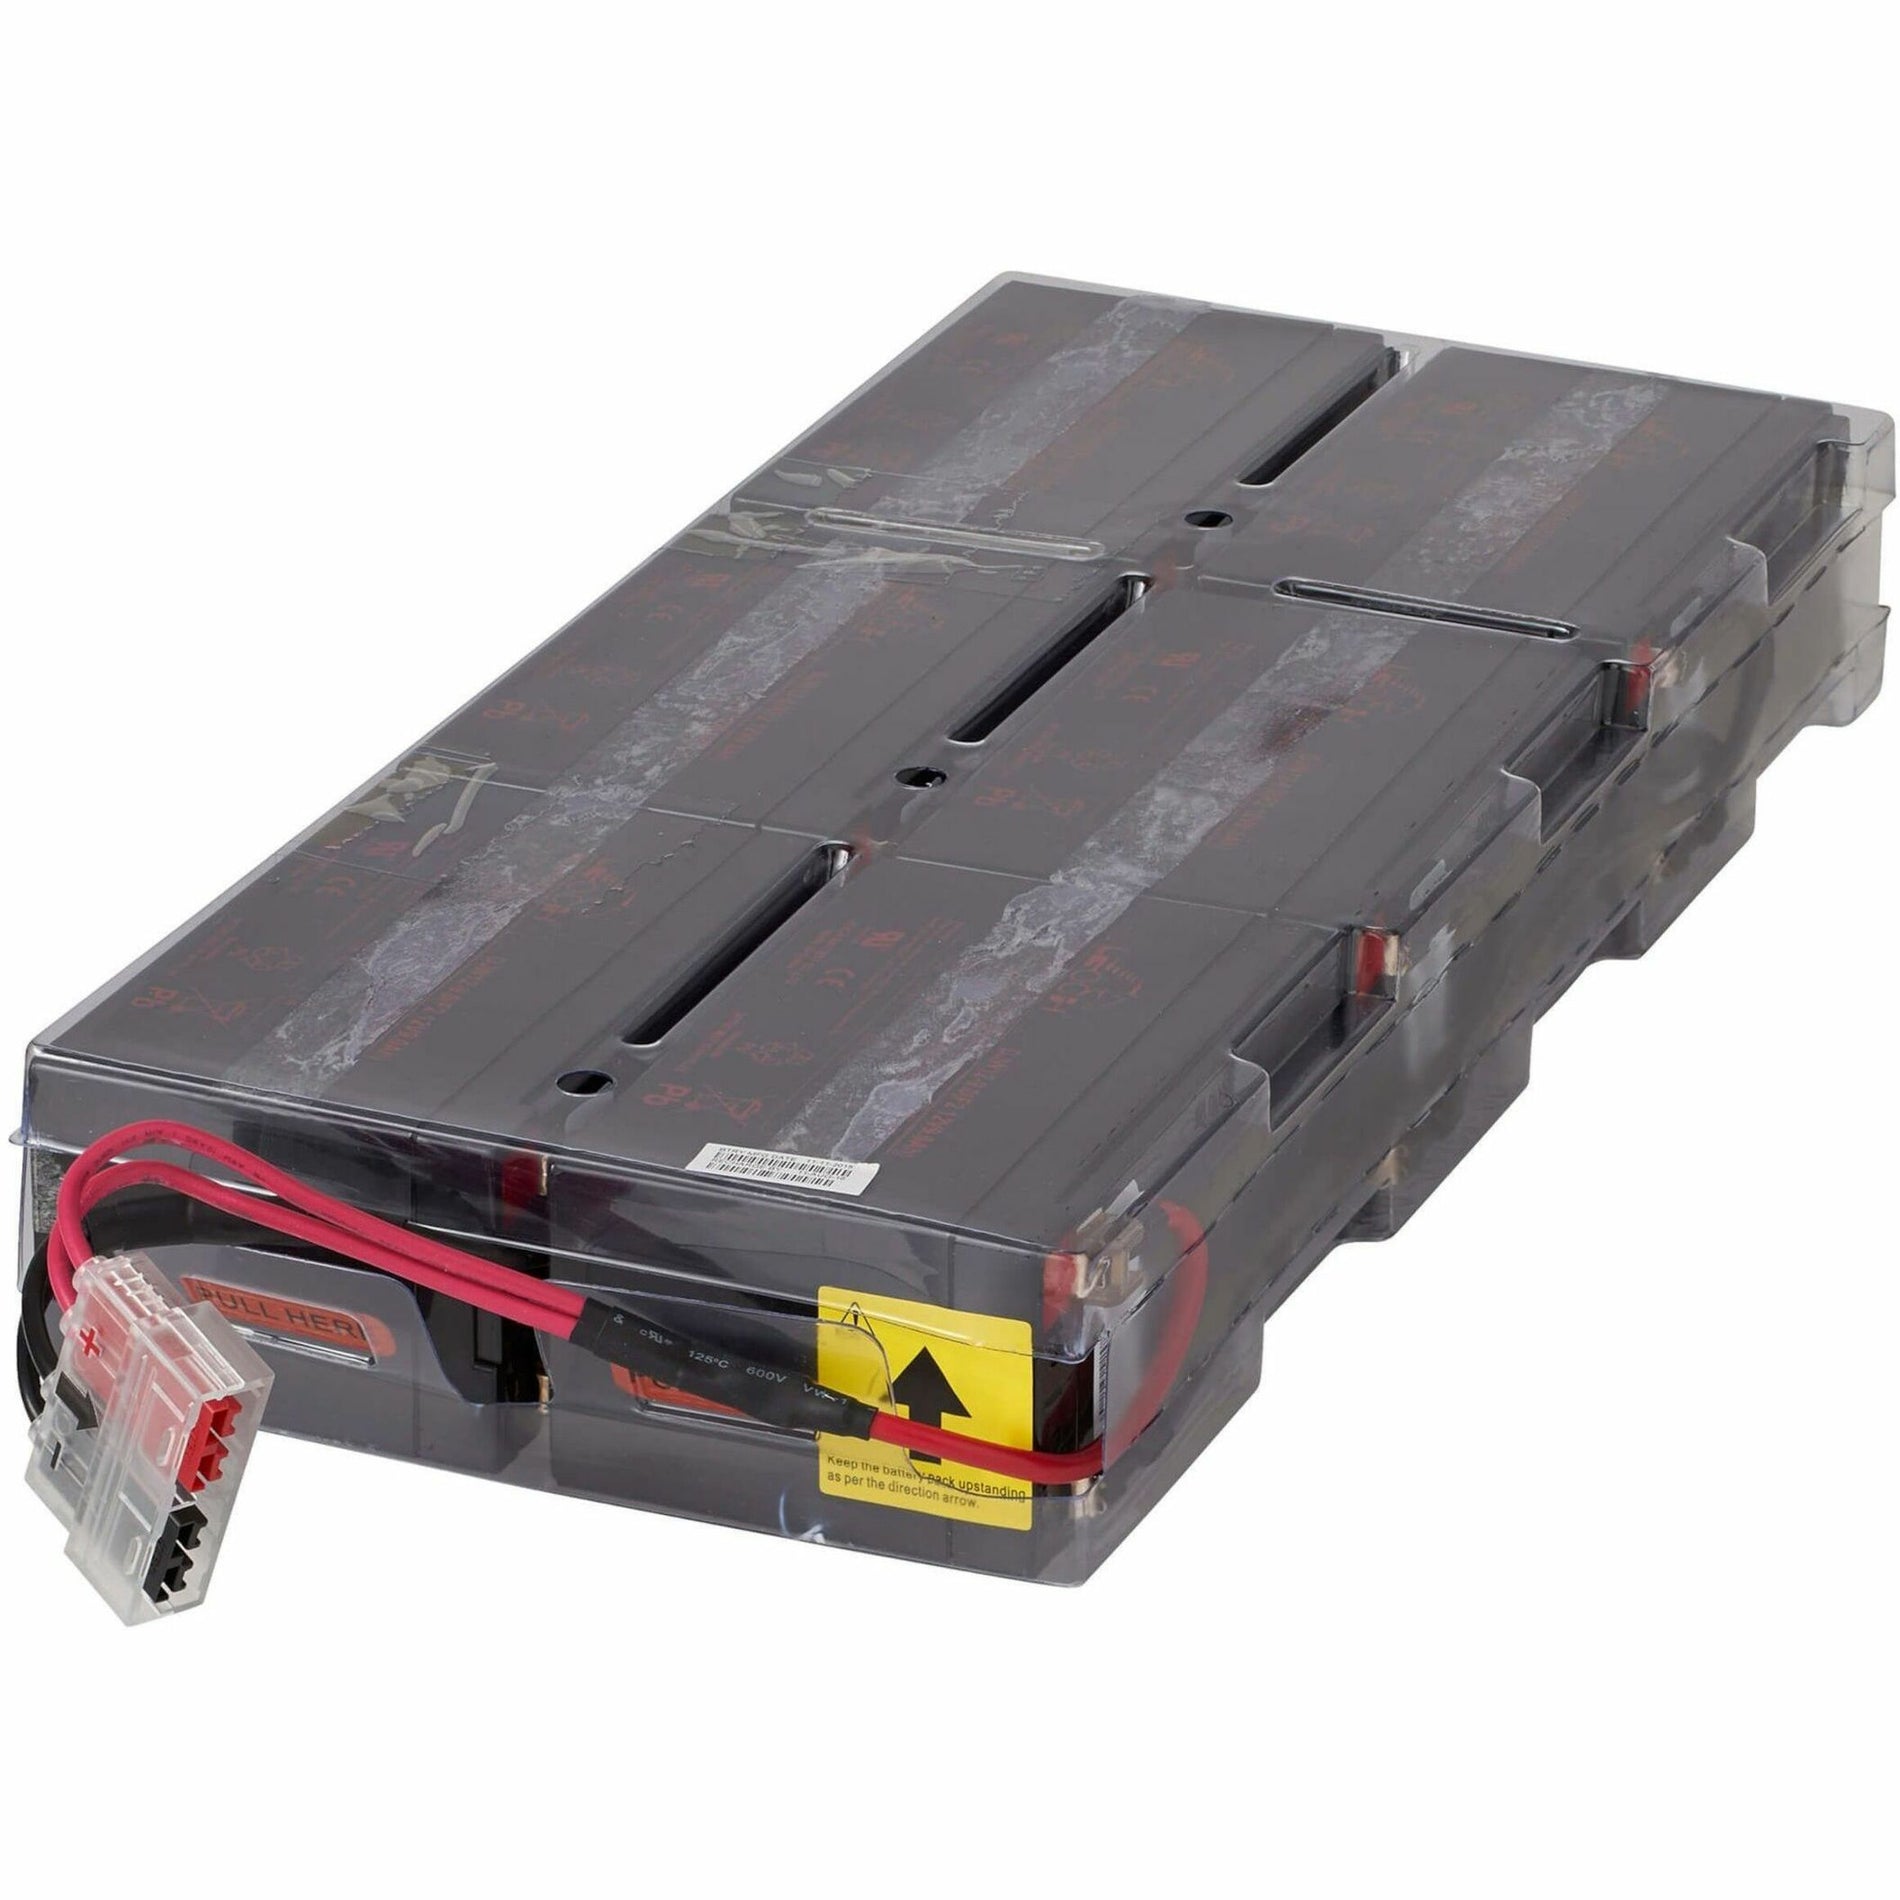 Eaton 744-A3297 UPS Battery Pack, Compatible with 9PX1500RT and 9PX1500GRT